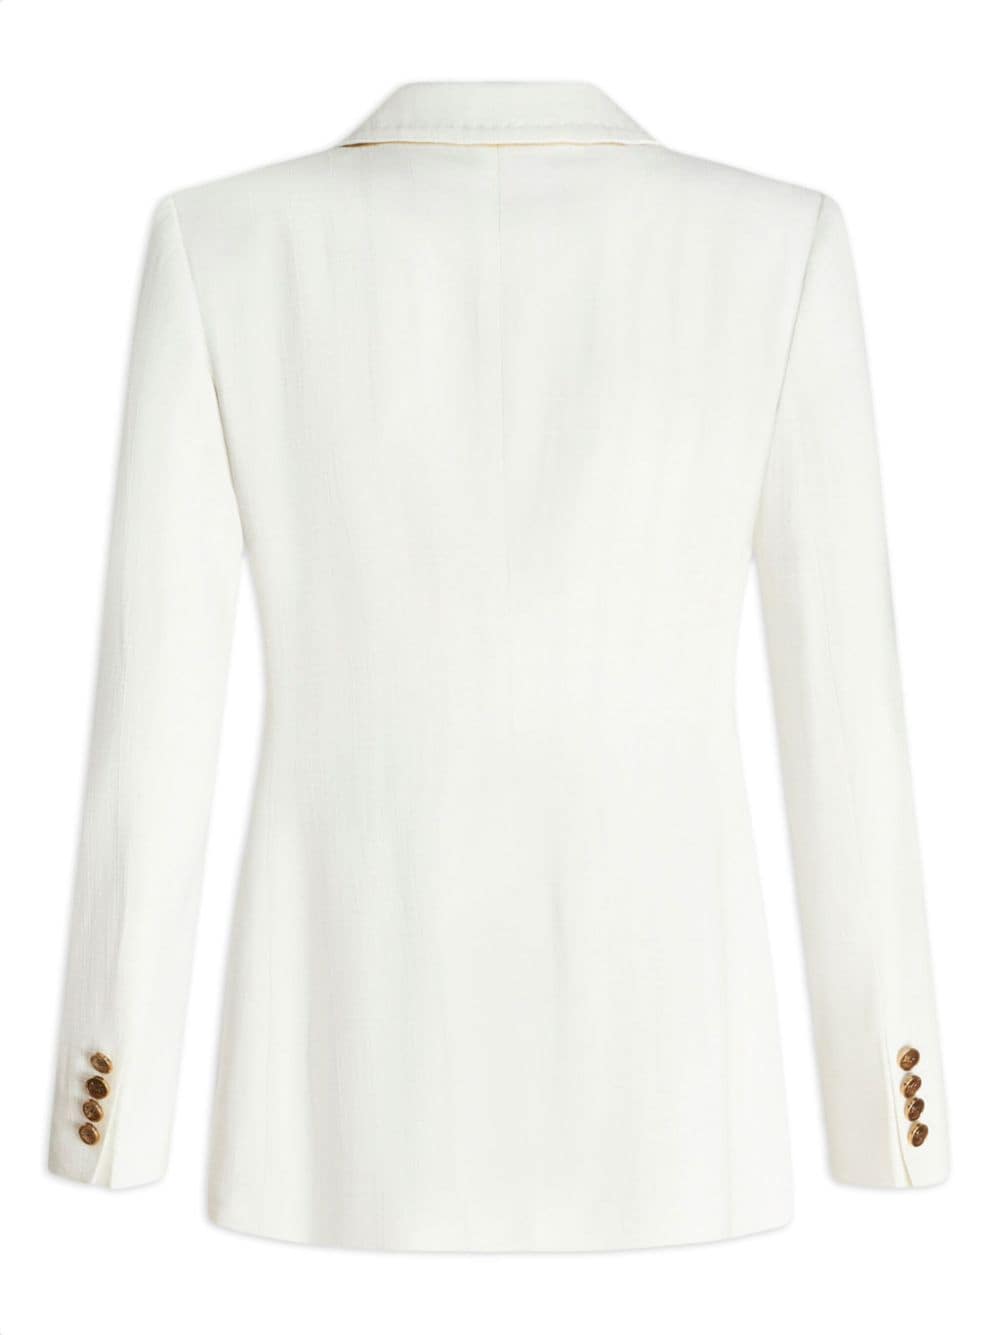 ETRO White Americana Outerwear with Golden Buttons for Women